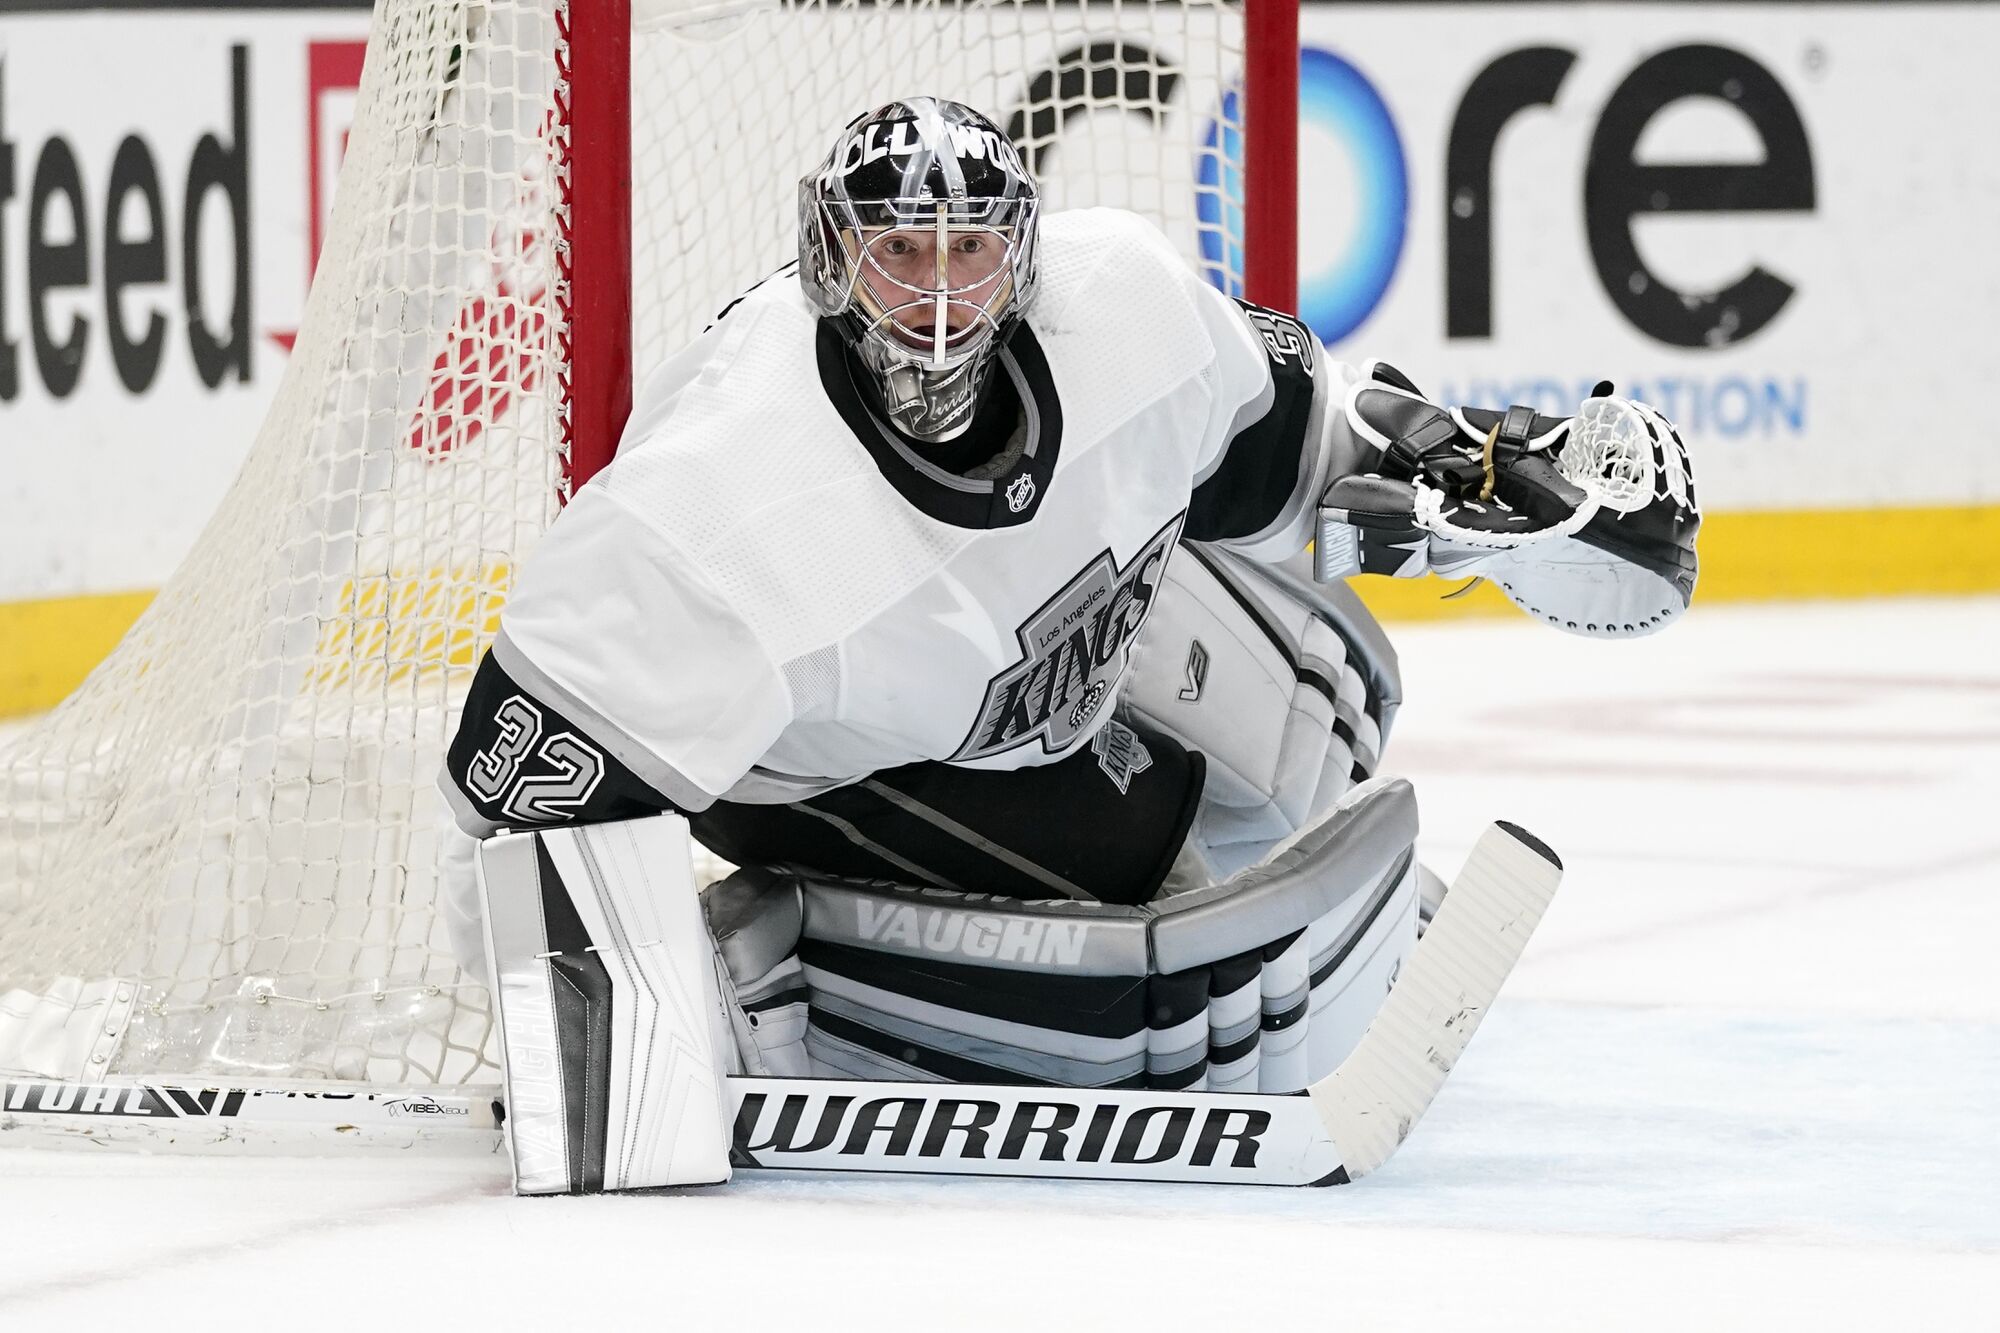 Kings goaltender Jonathan Quick crouches in goal and looks across the ice